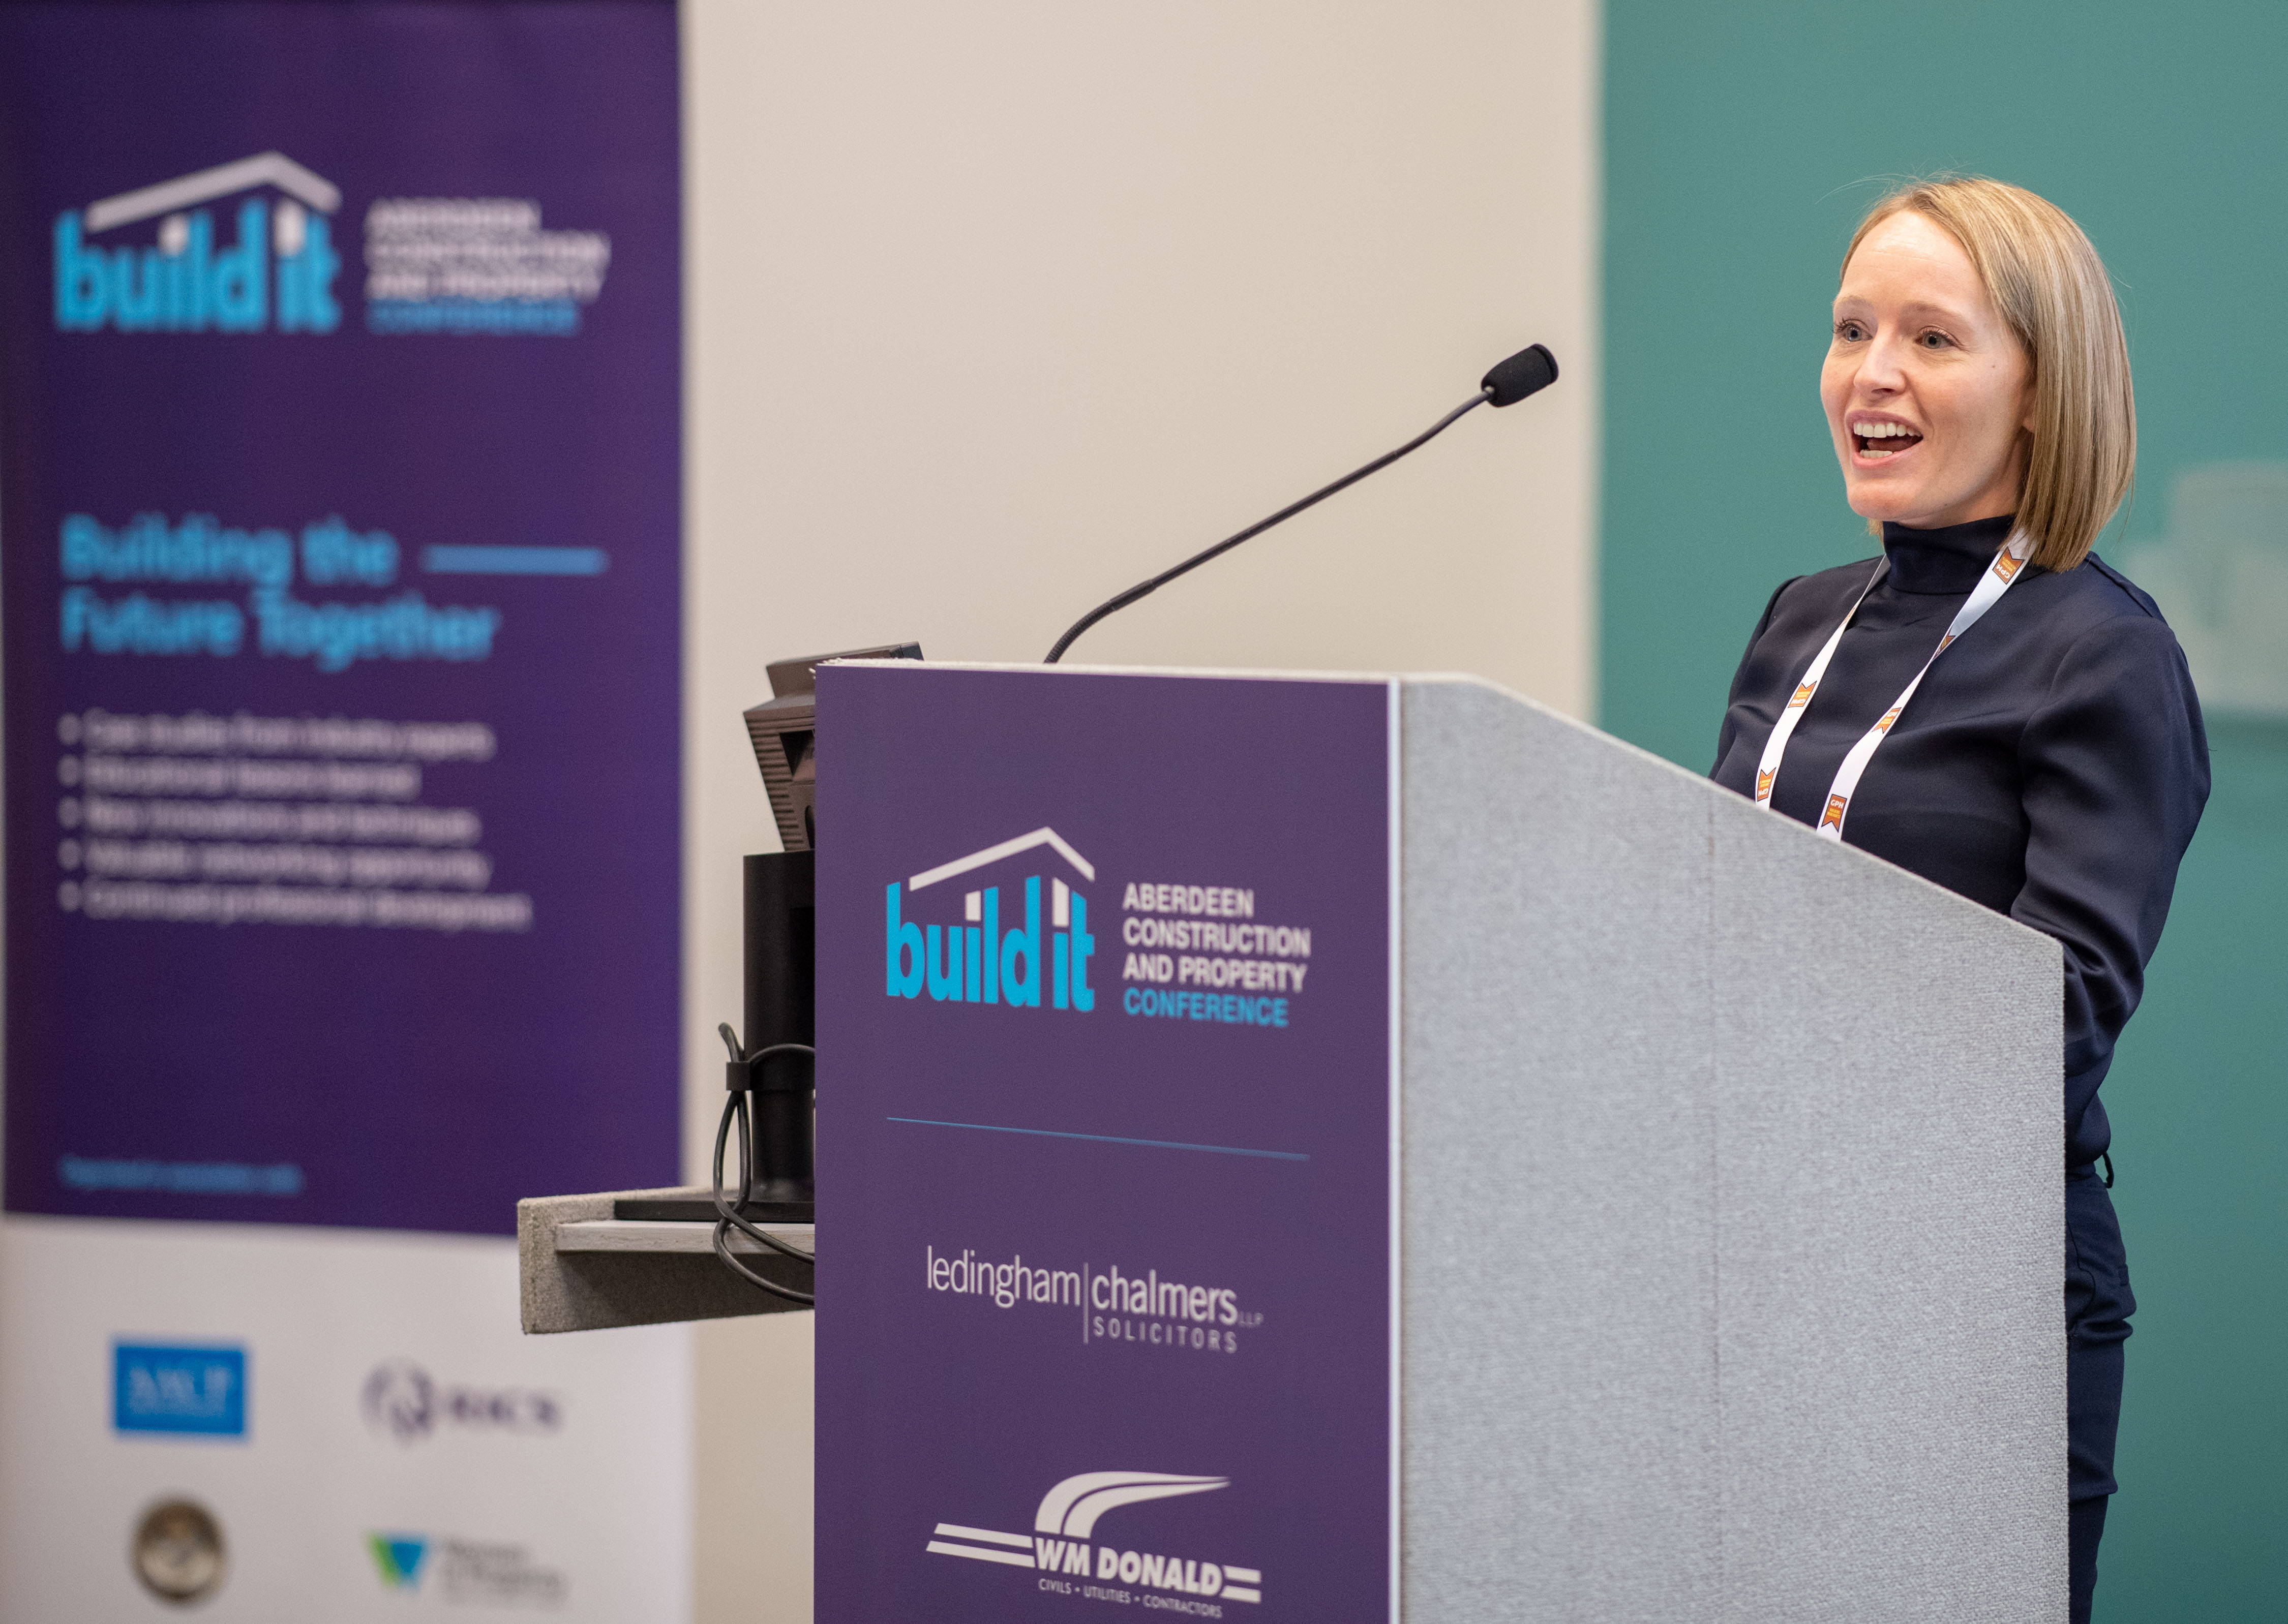 Sustainability is key as construction conference returns North East for second year